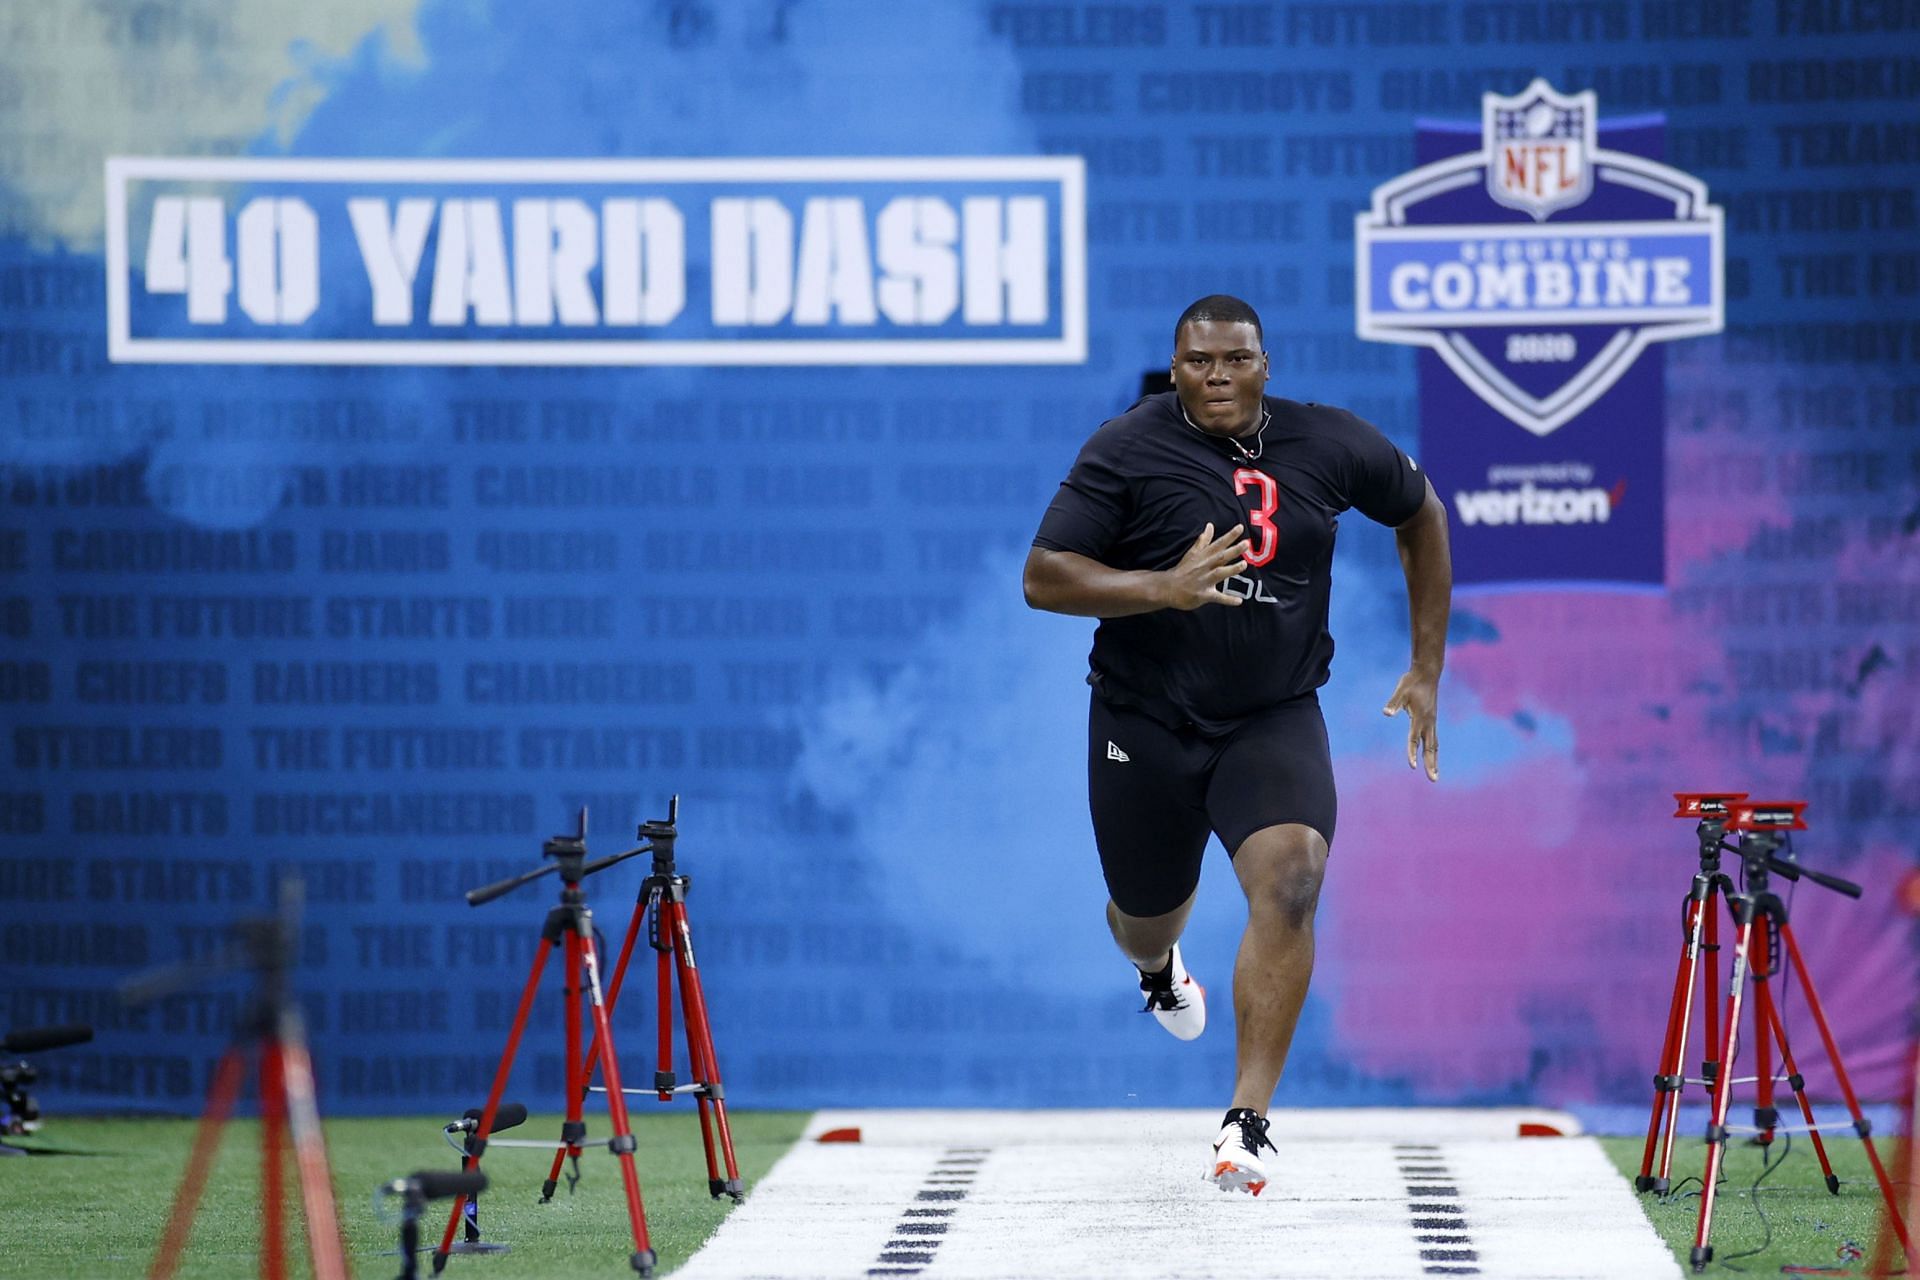 The 40 yard dash is the NFL Scouting Combine&#039;s unofficial flagship event